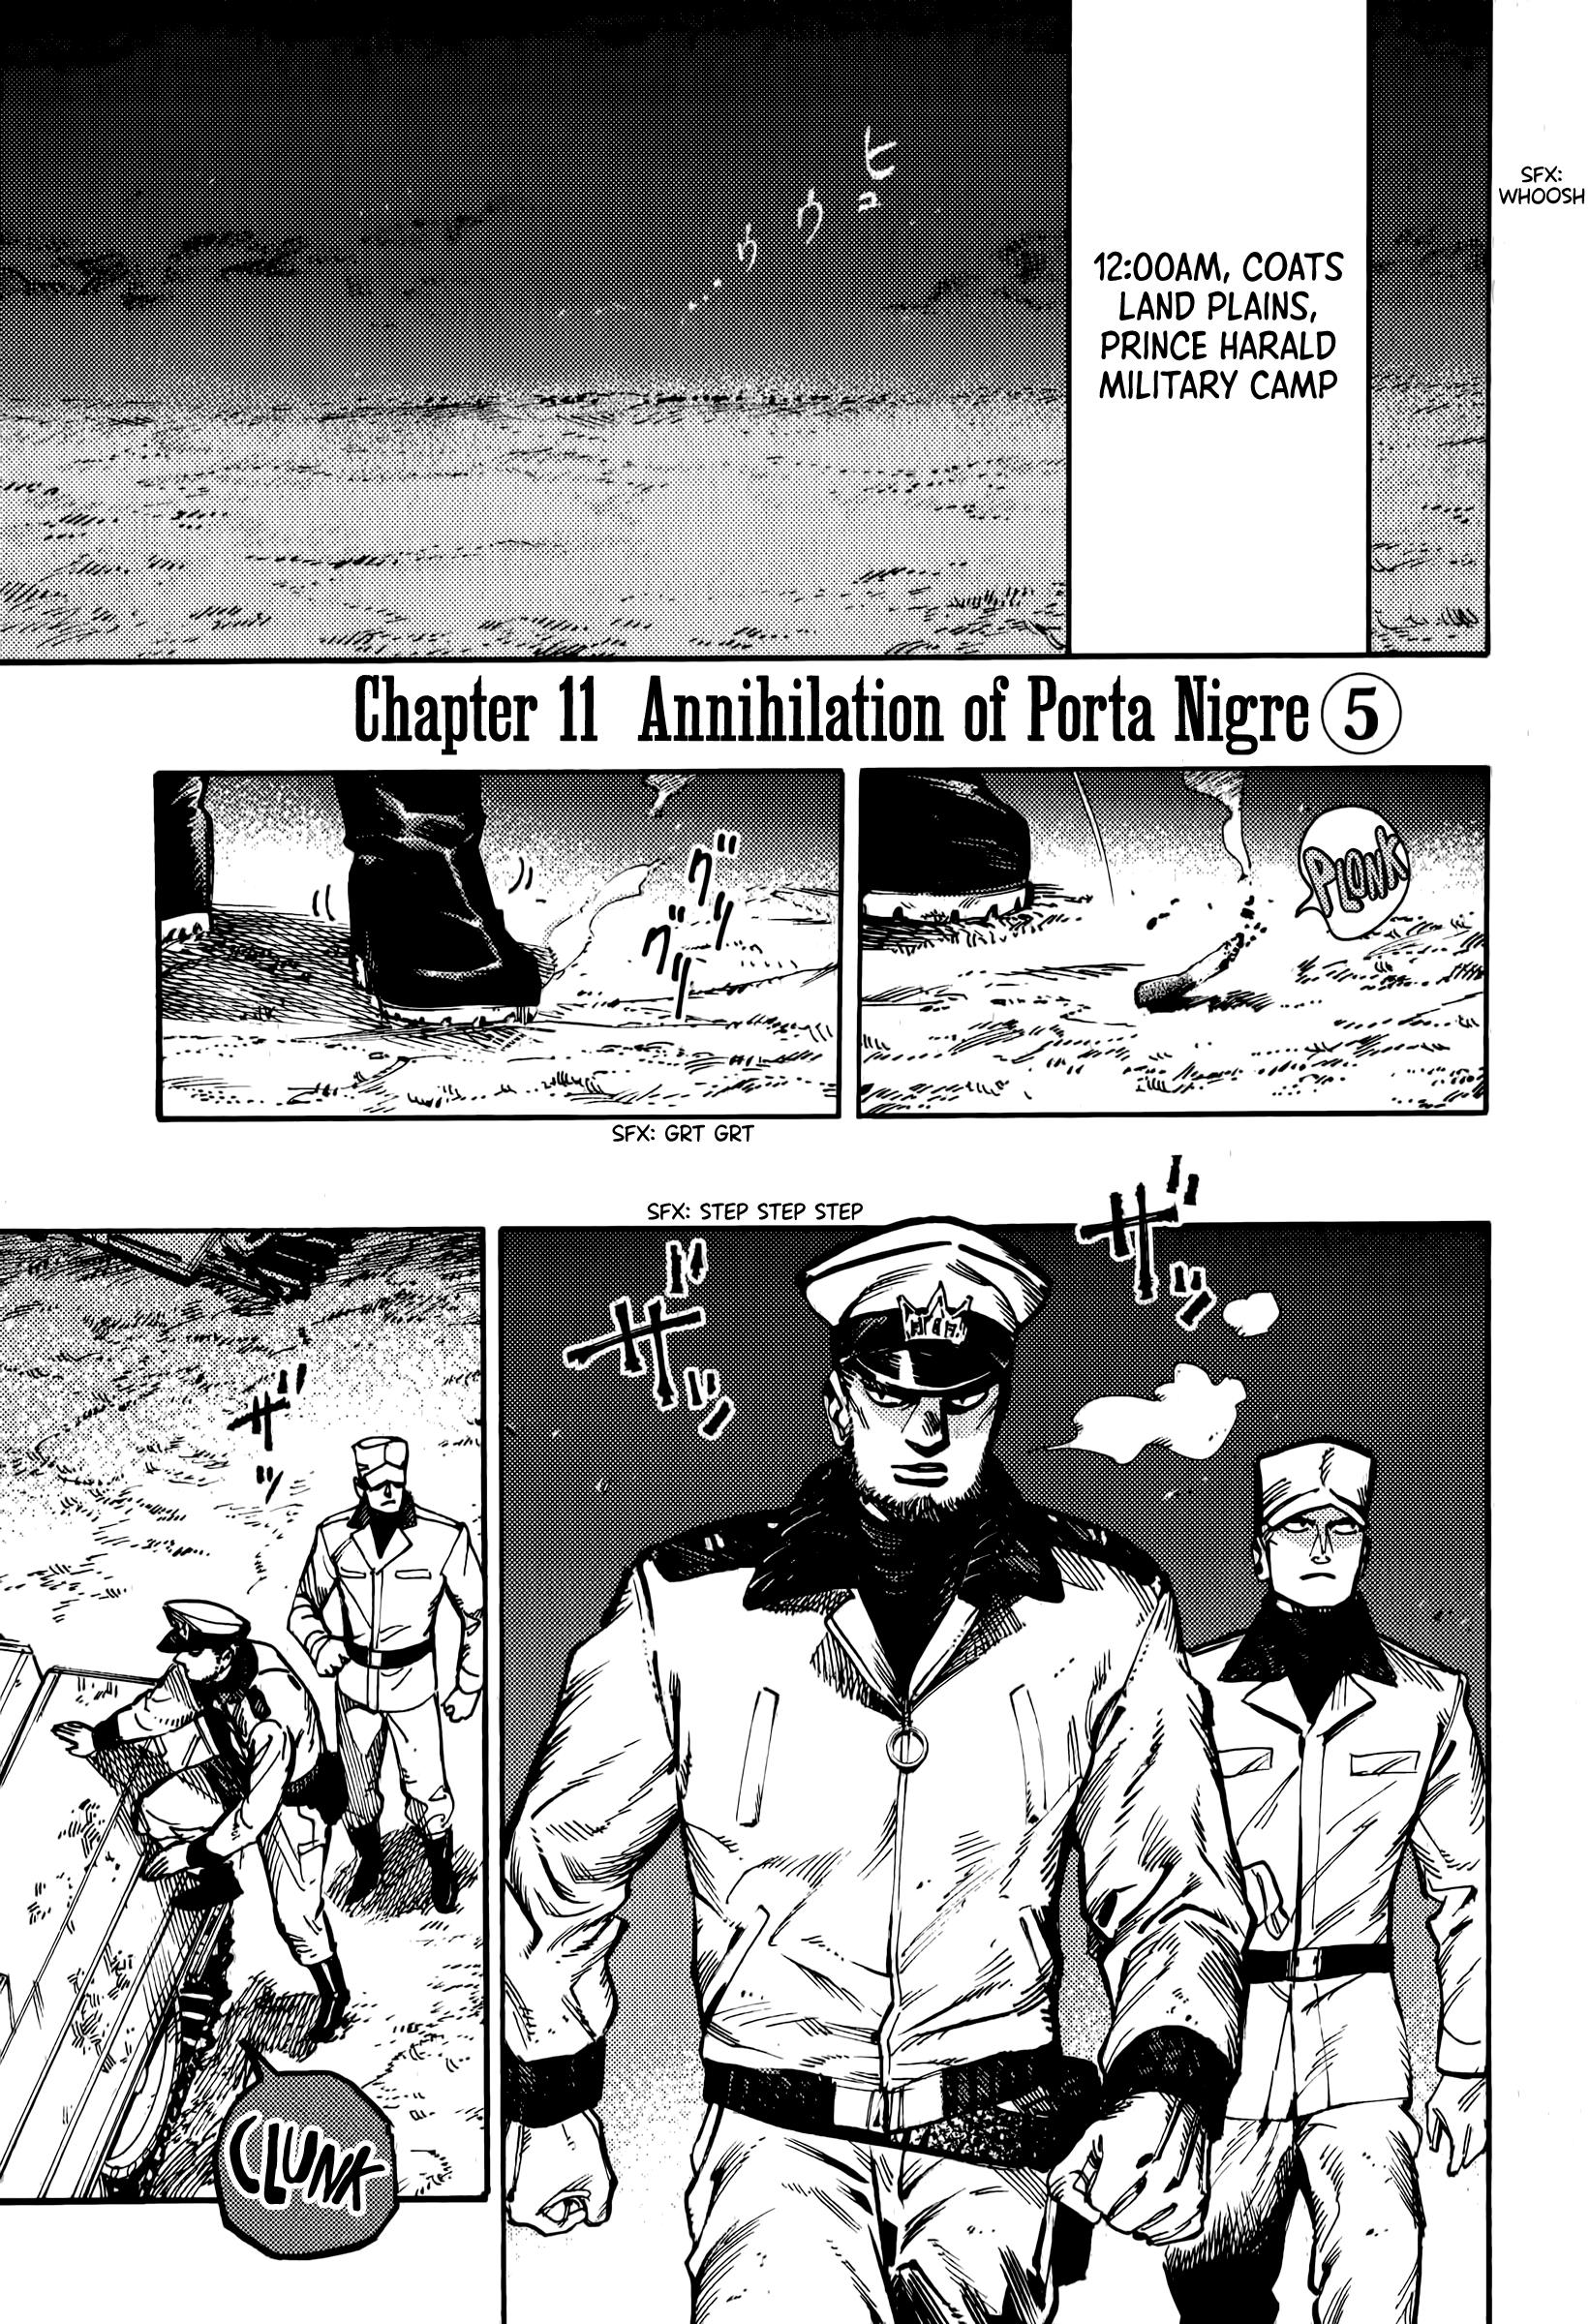 The Chronicle Of Seven Cities Vol.2 Chapter 11: Annihilation Of Porta Nigre, Part ⑤ - Picture 1